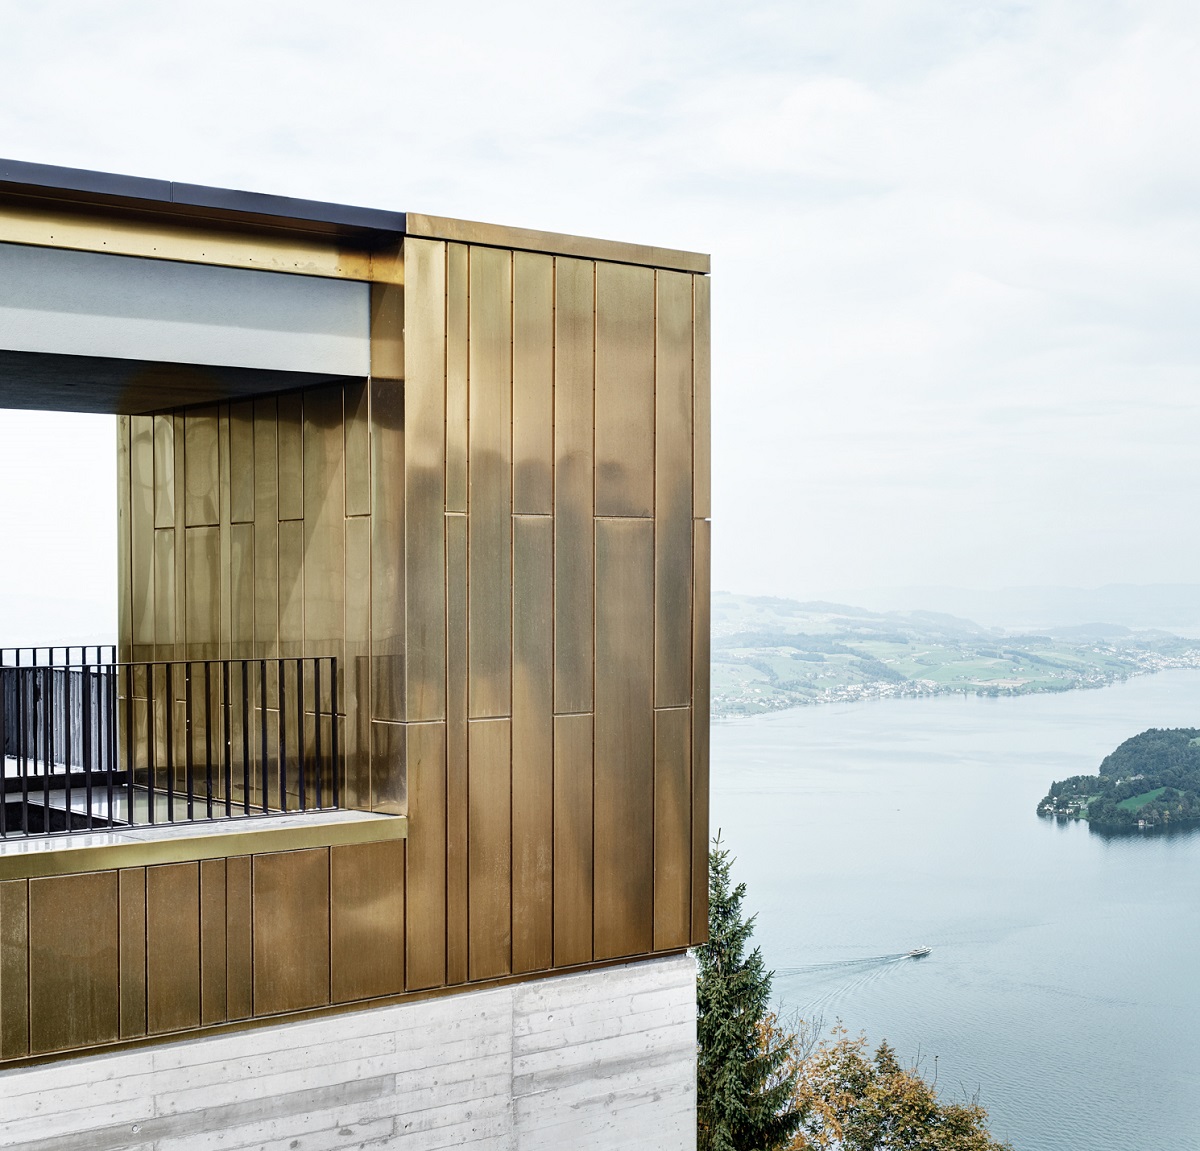 Top floor of the Hotel Bürgenstock. Topmost part of the building is made from cassettes of Nordic Brass copper. The part of the building below it, is made from concrete. Green hills and Lake Lucerne can be seen in background.